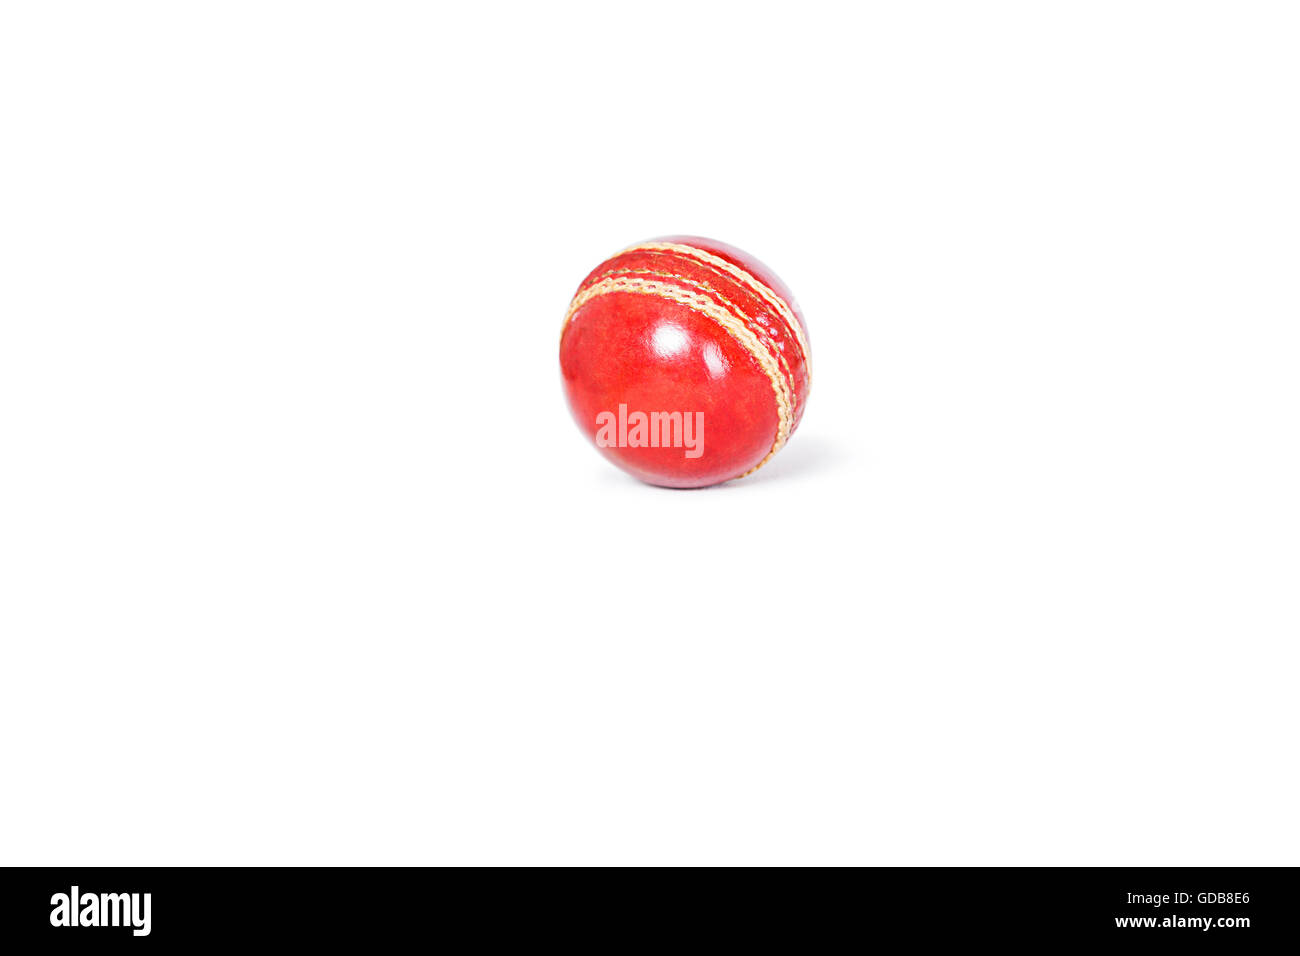 Sport Cricket Red Leather Ball Nobody Close Up White background Stock Photo